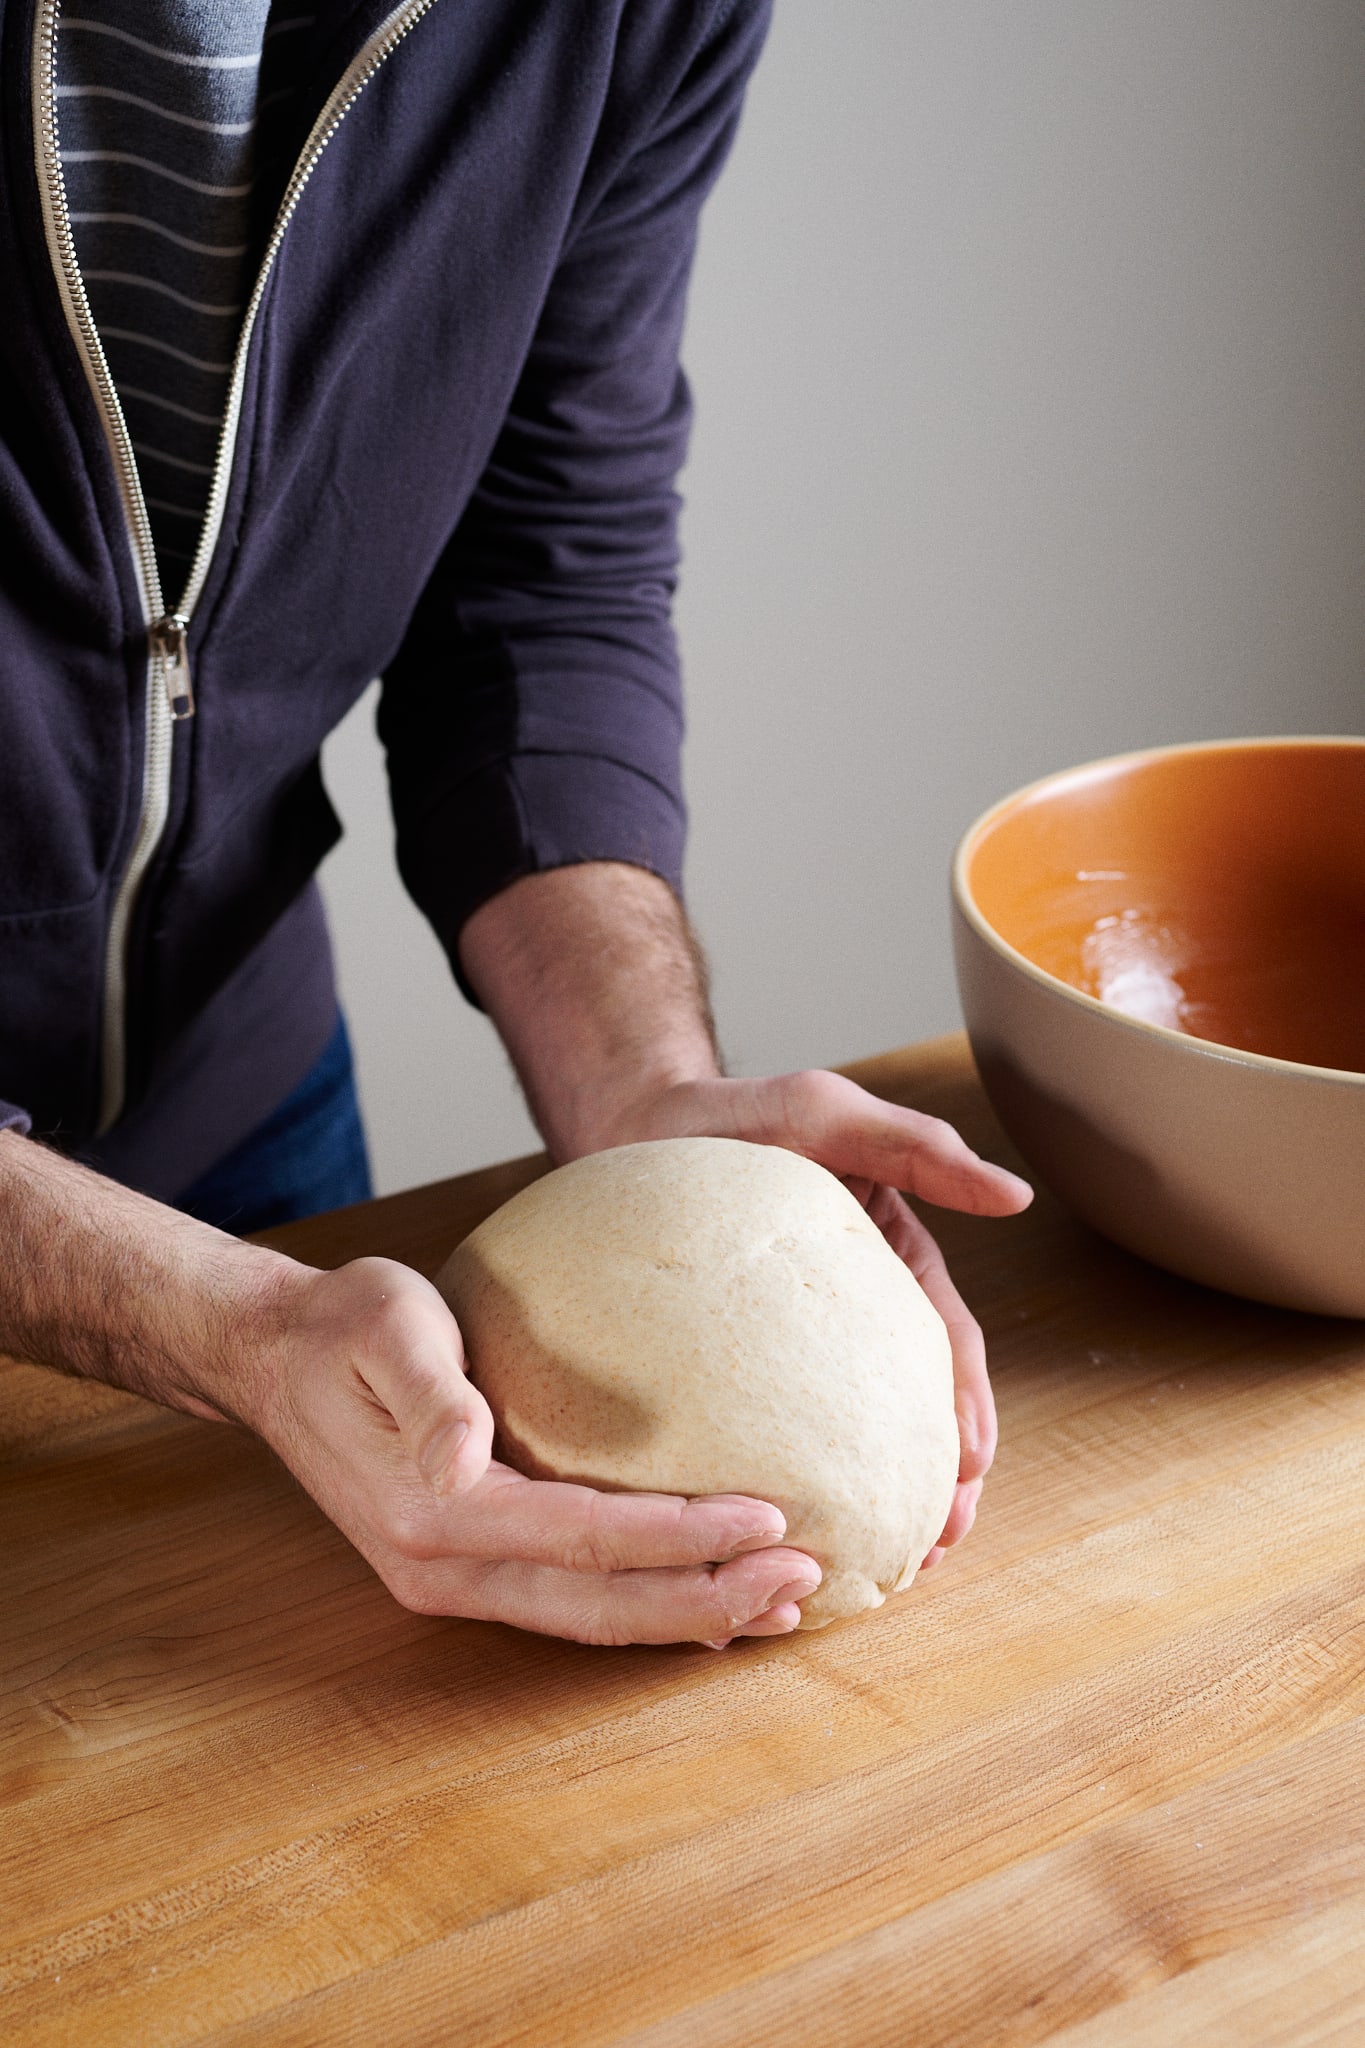 After mixing, ball the dough up and place into bulk fermentation container.